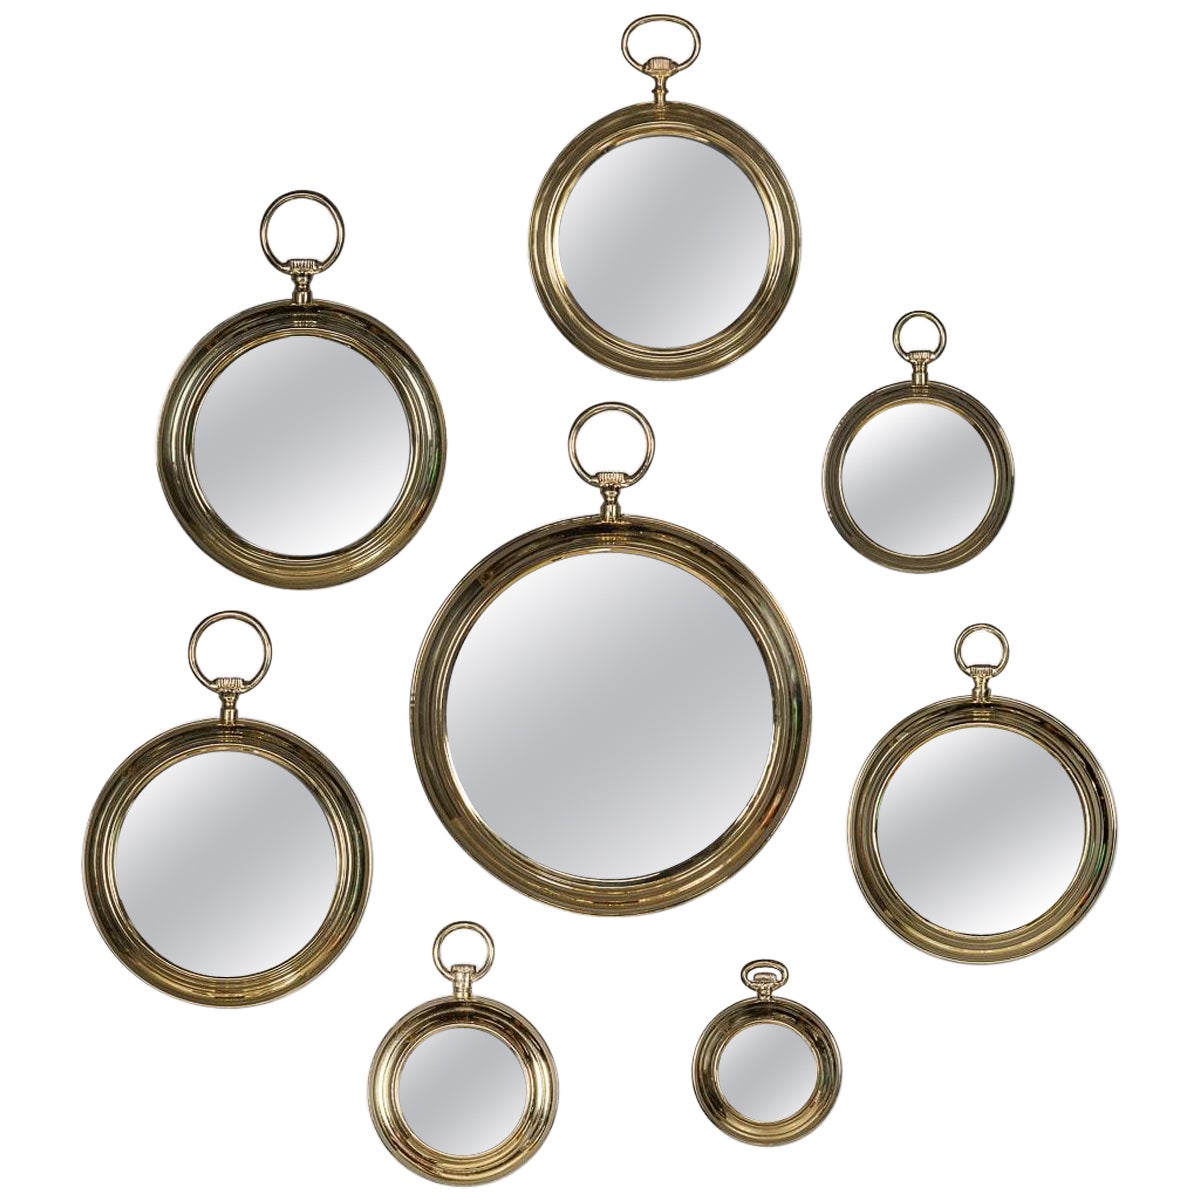 20th Century Striking Collection Of Pocket Watch Shaped Mirrors, c.1950-1970